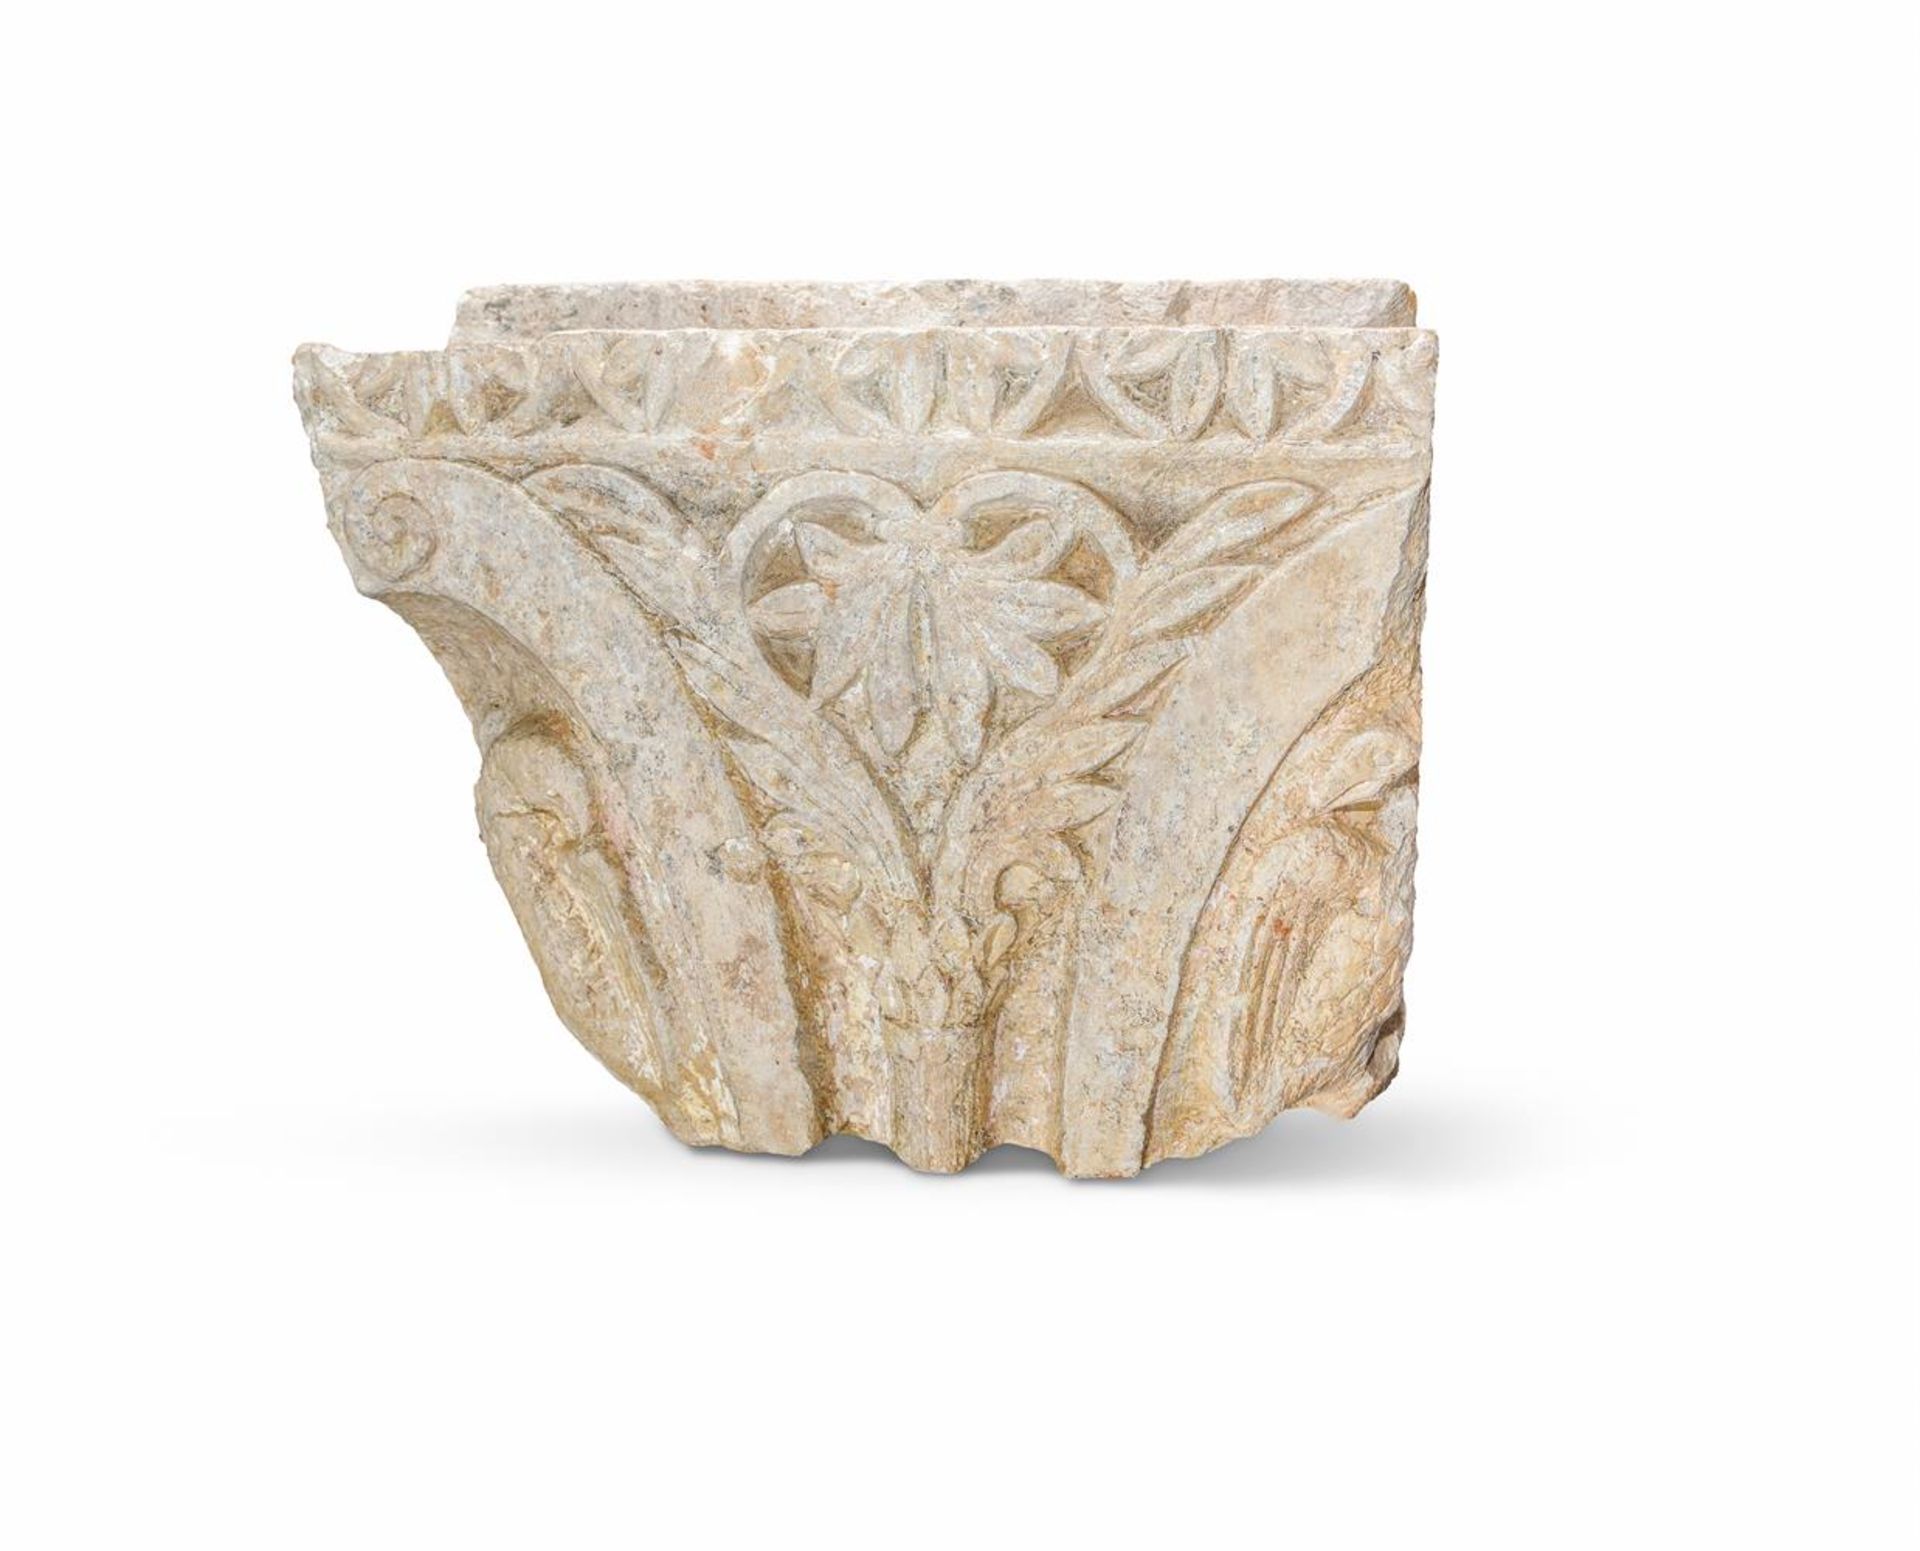 A ROMANESQUE CARVED CORNER CAPITAL IN THE 13TH CENTURY MANNER